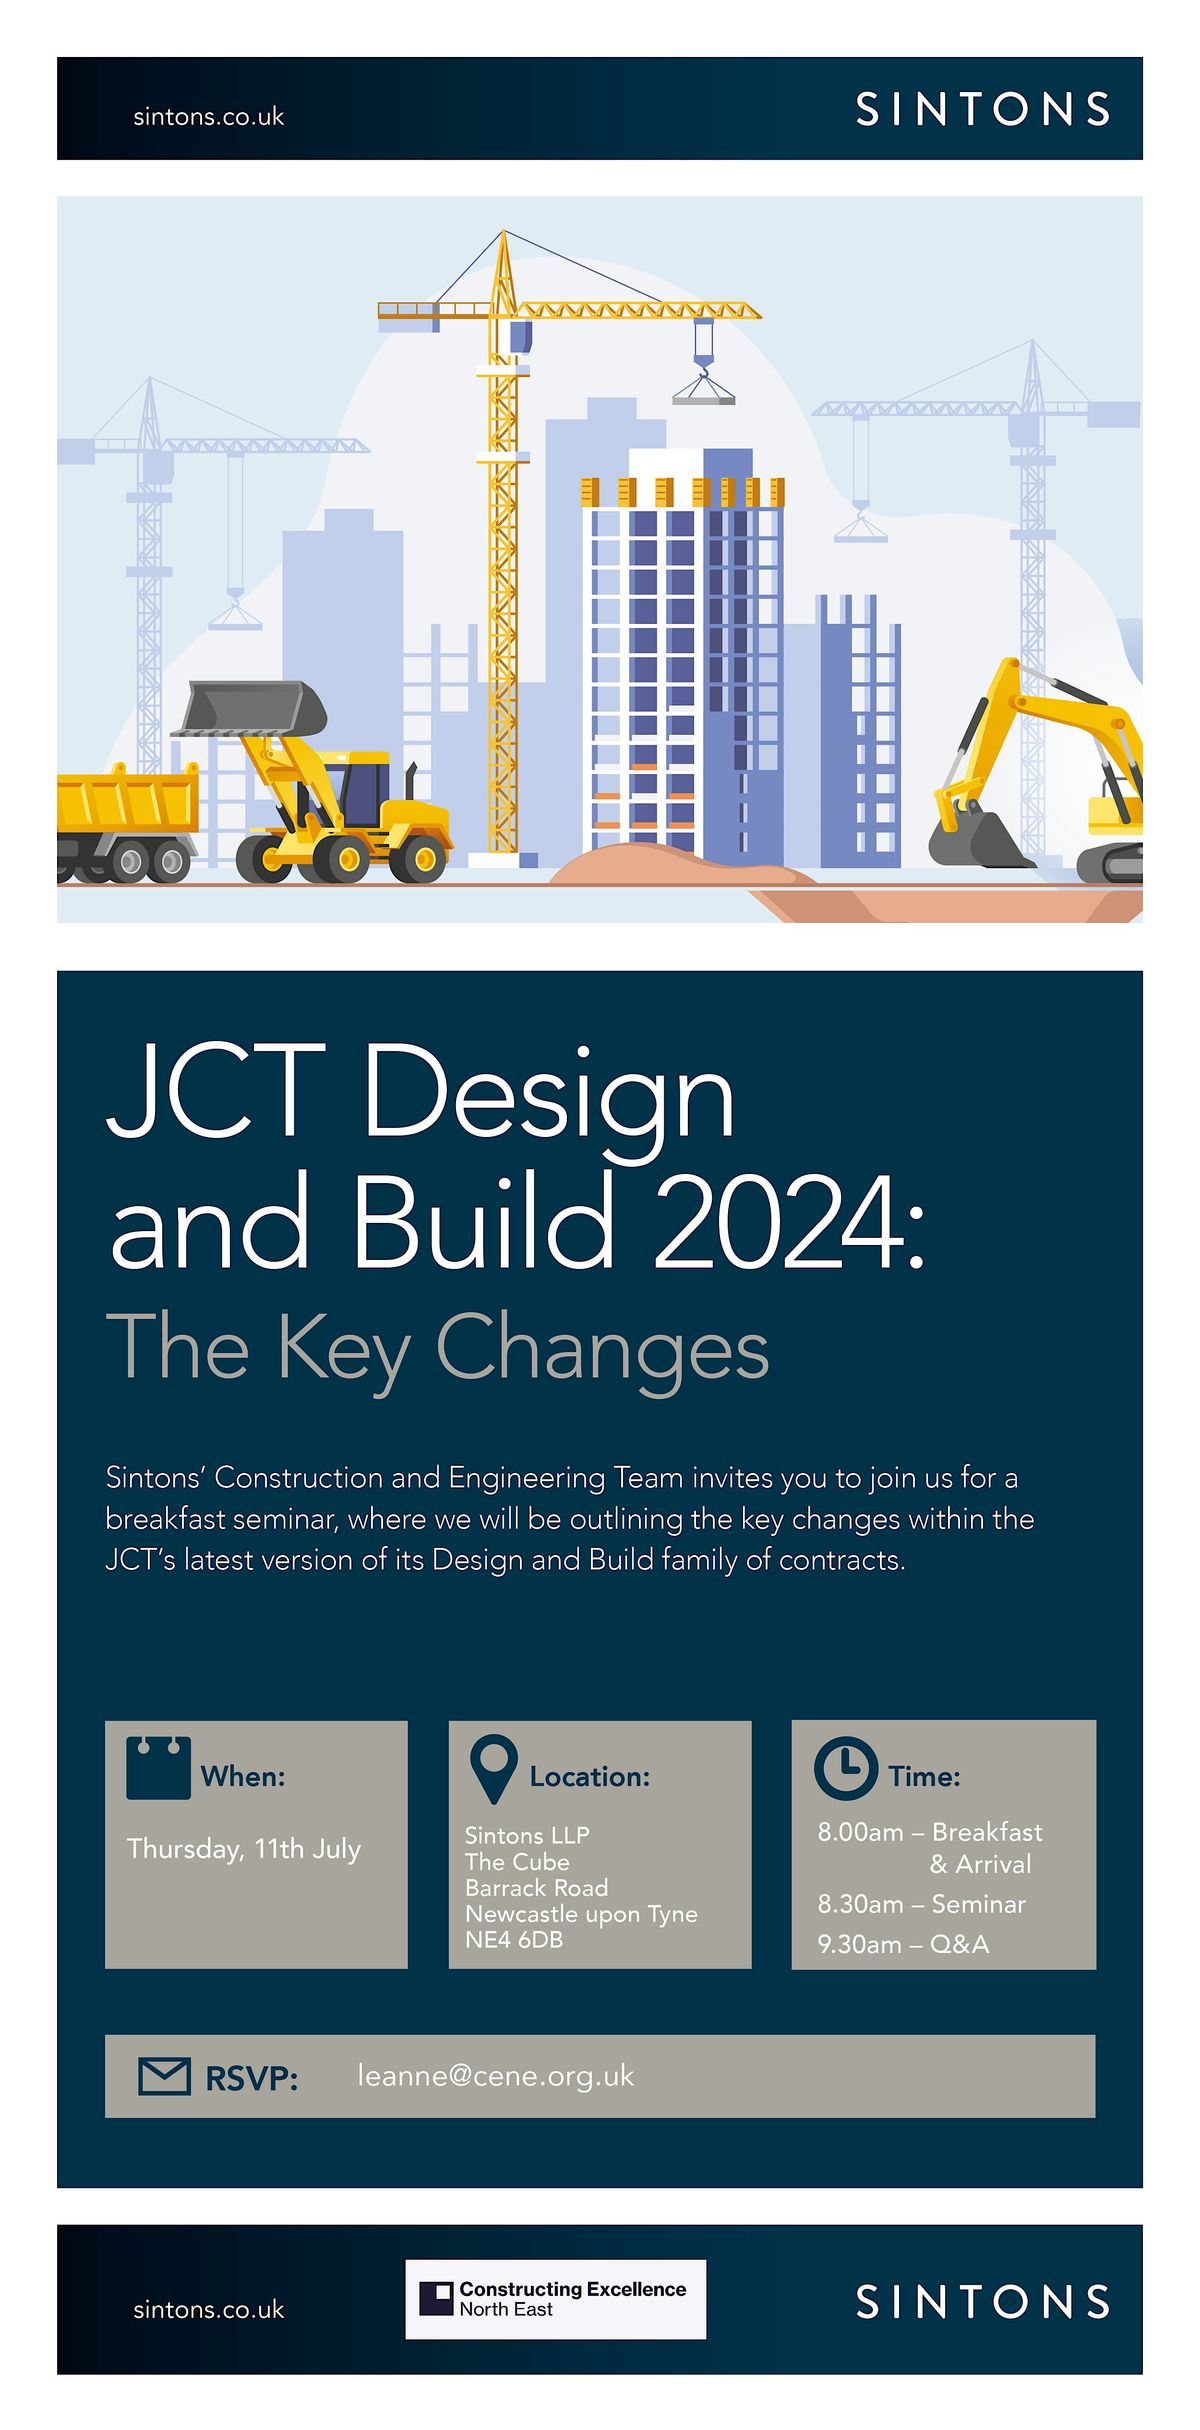 JCT Design and Build 2024